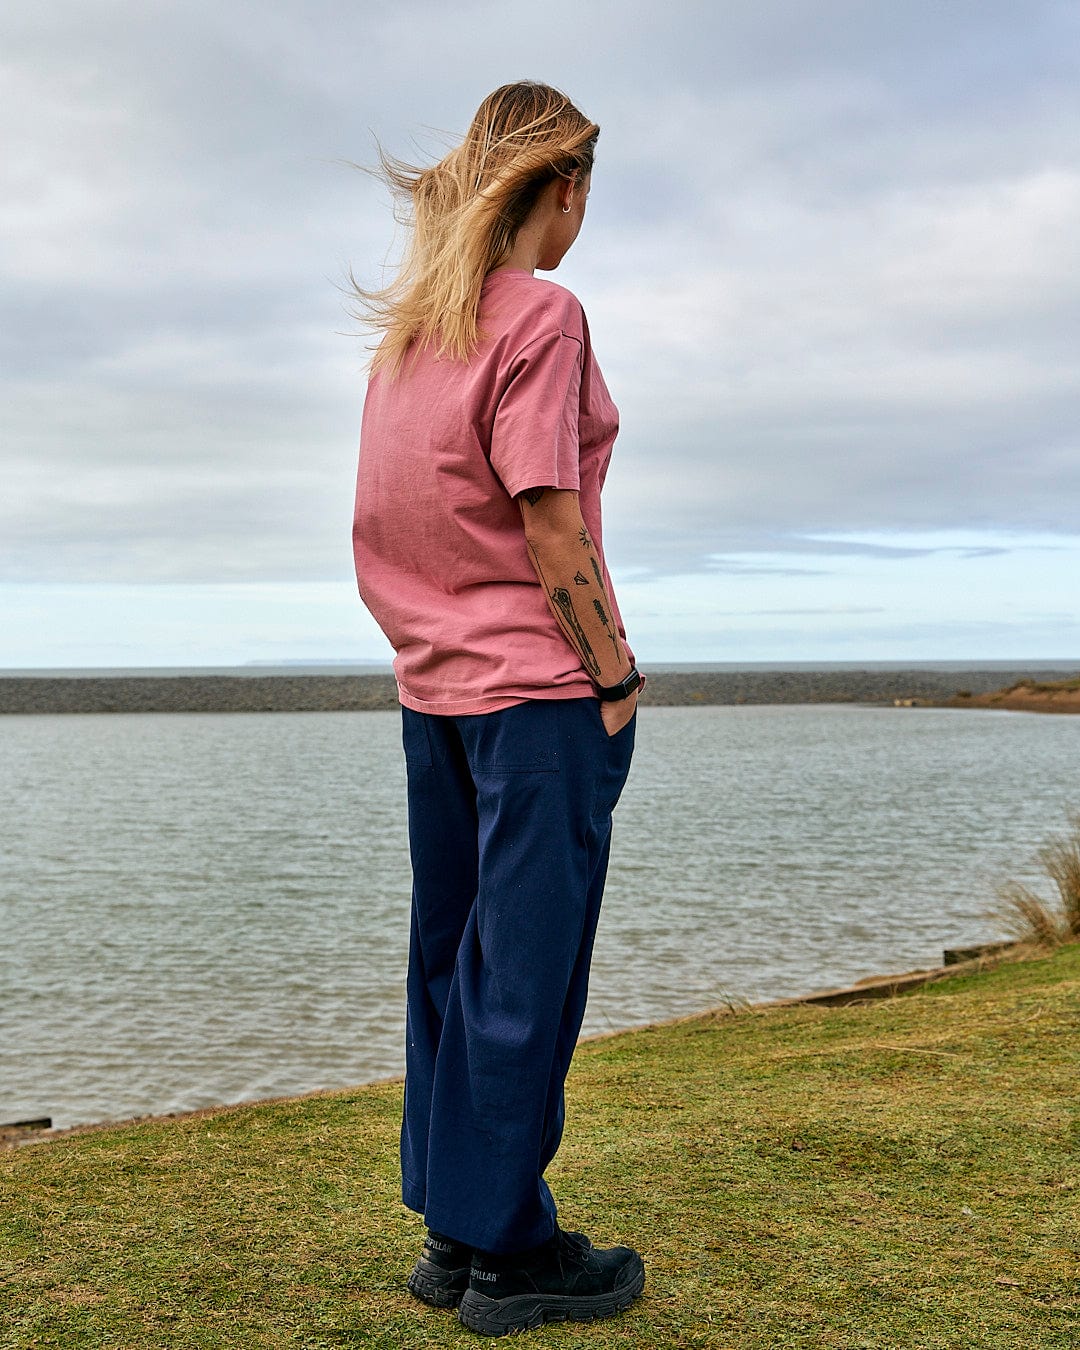 A woman is standing in front of a body of water wearing the Saltrock Sea Shells - Womens Relaxed Fit T-Shirt - Mid Pink.